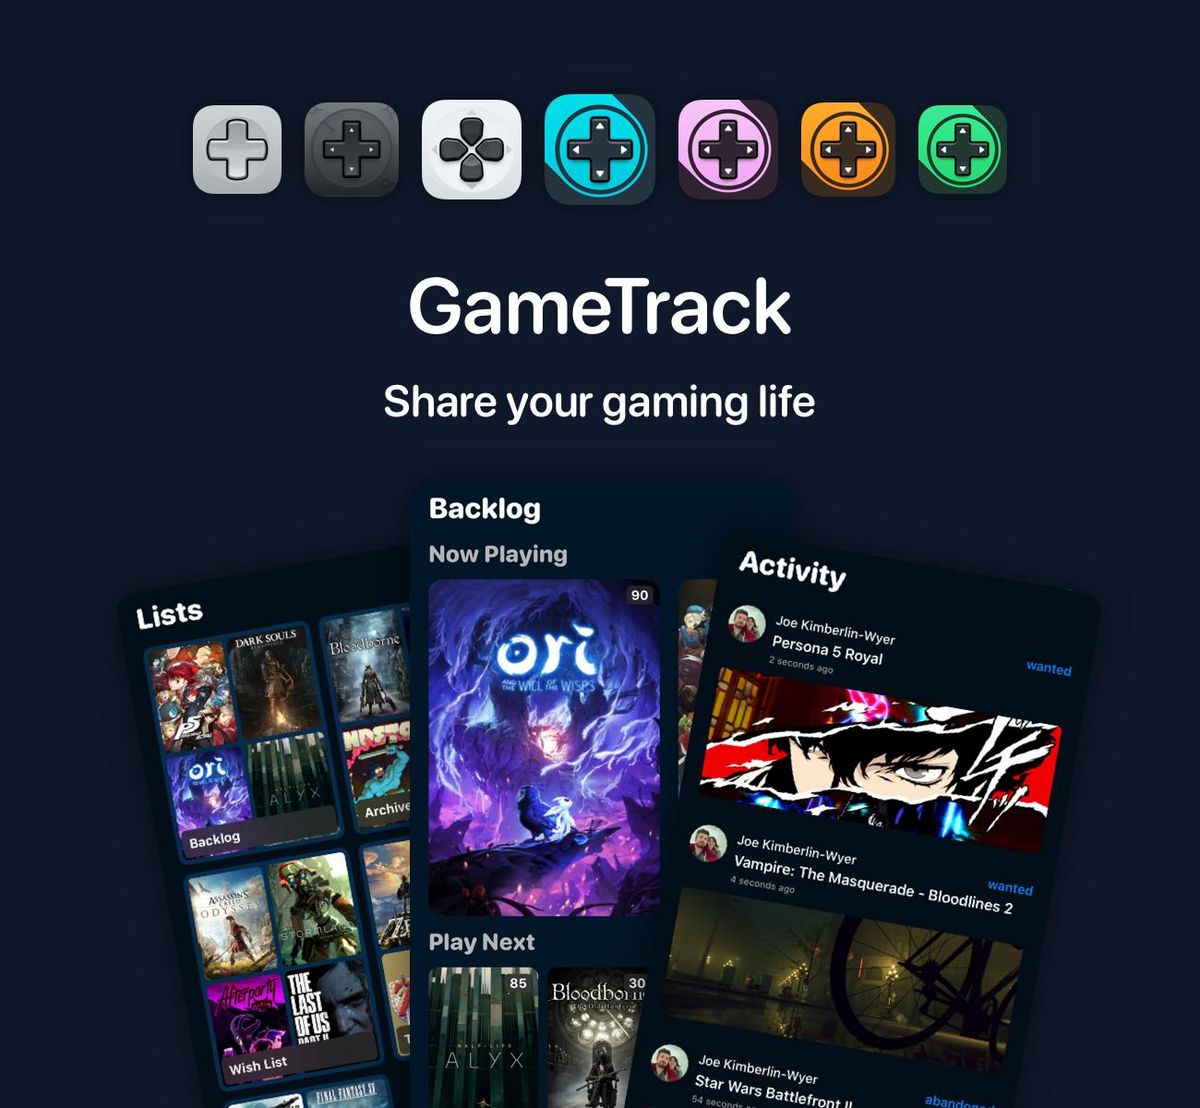 Epic has apps for iOS and Android ready to go, Pocket Gamer.biz